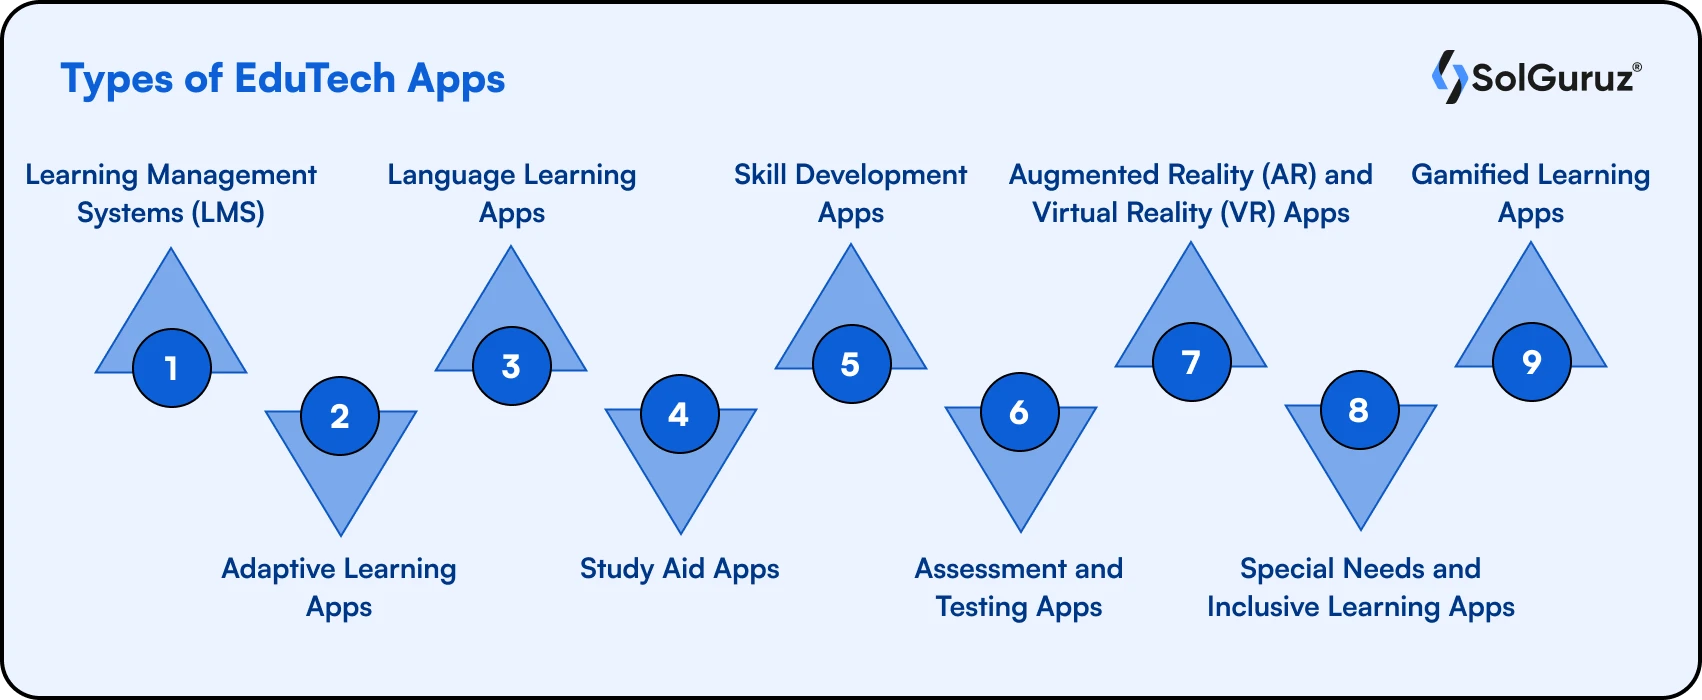 EdTech apps have grown in variety and functionality, catering to diverse learning needs and styles. In this image, it's showing various types of EdTech apps, each designed to support education and enhance the learning experience. 